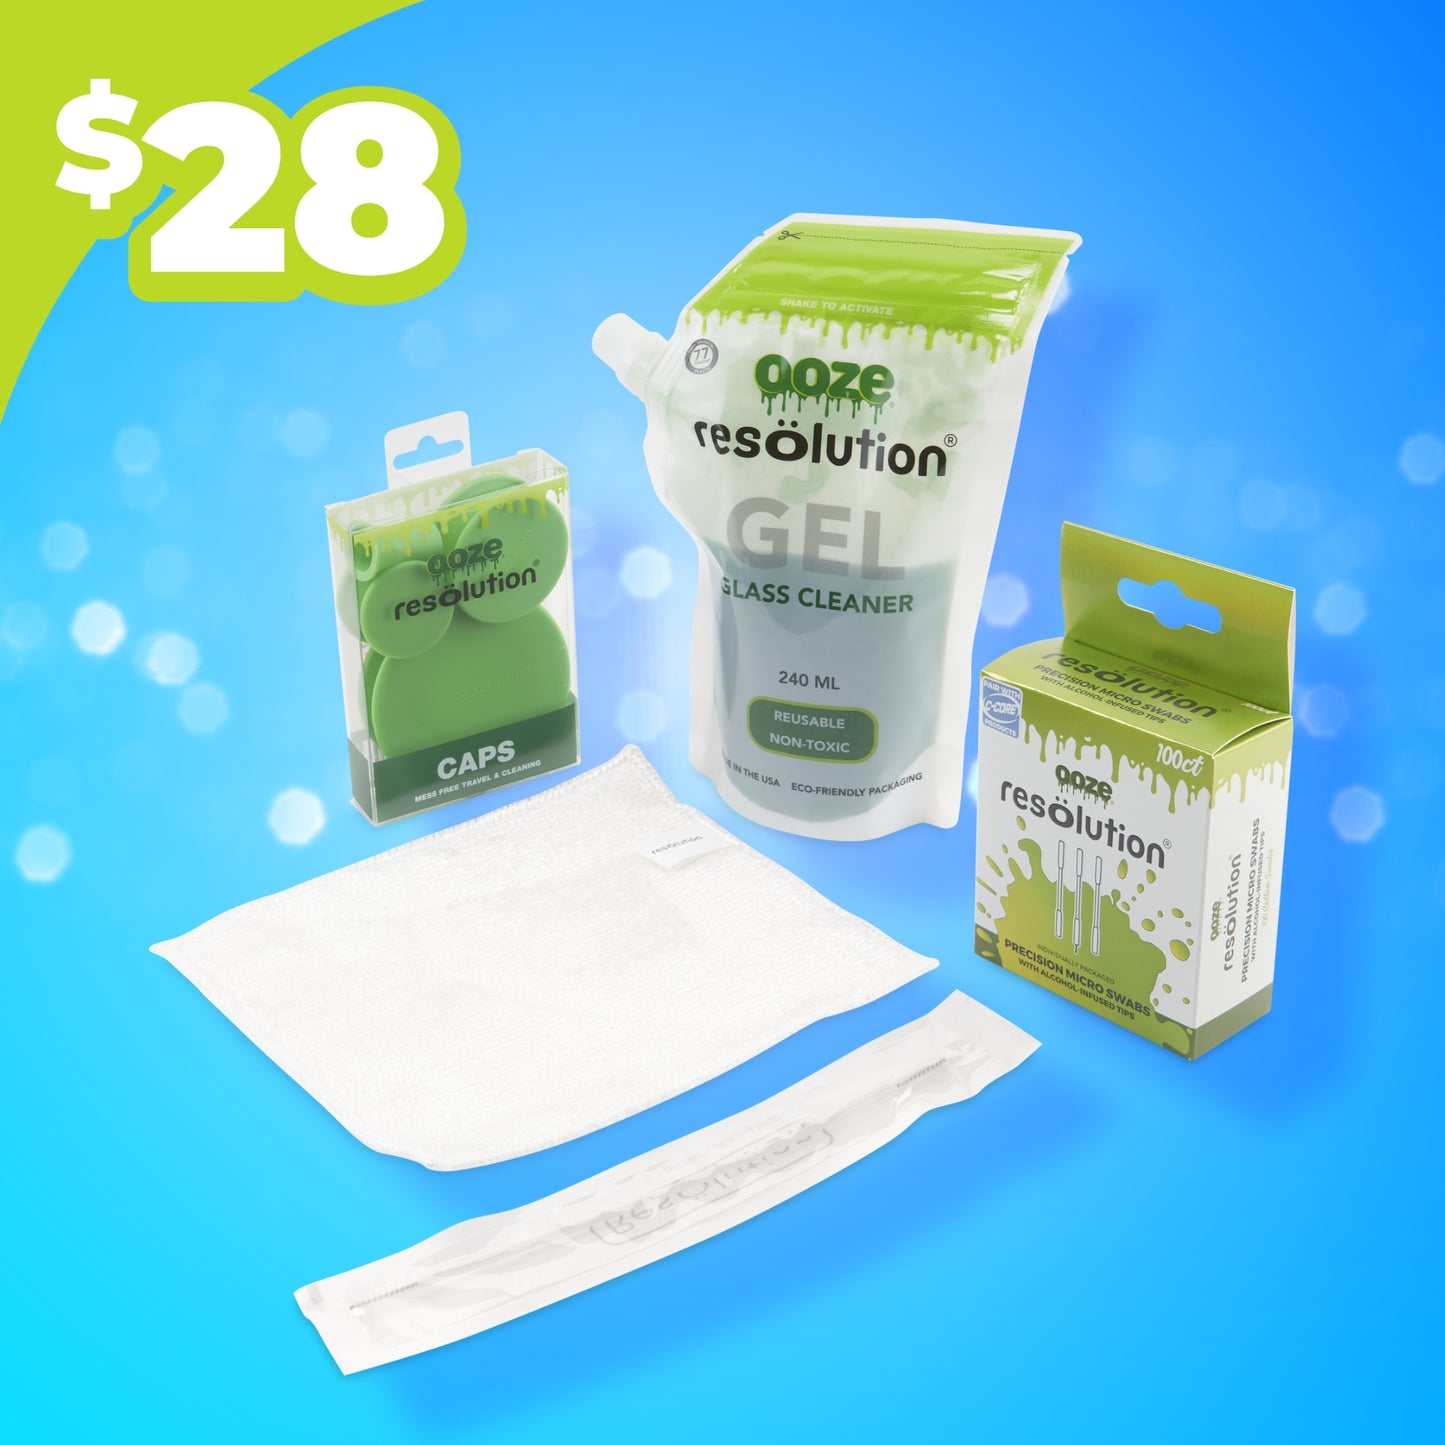 Ooze Resolution Spotless Cleaning Kit – Green